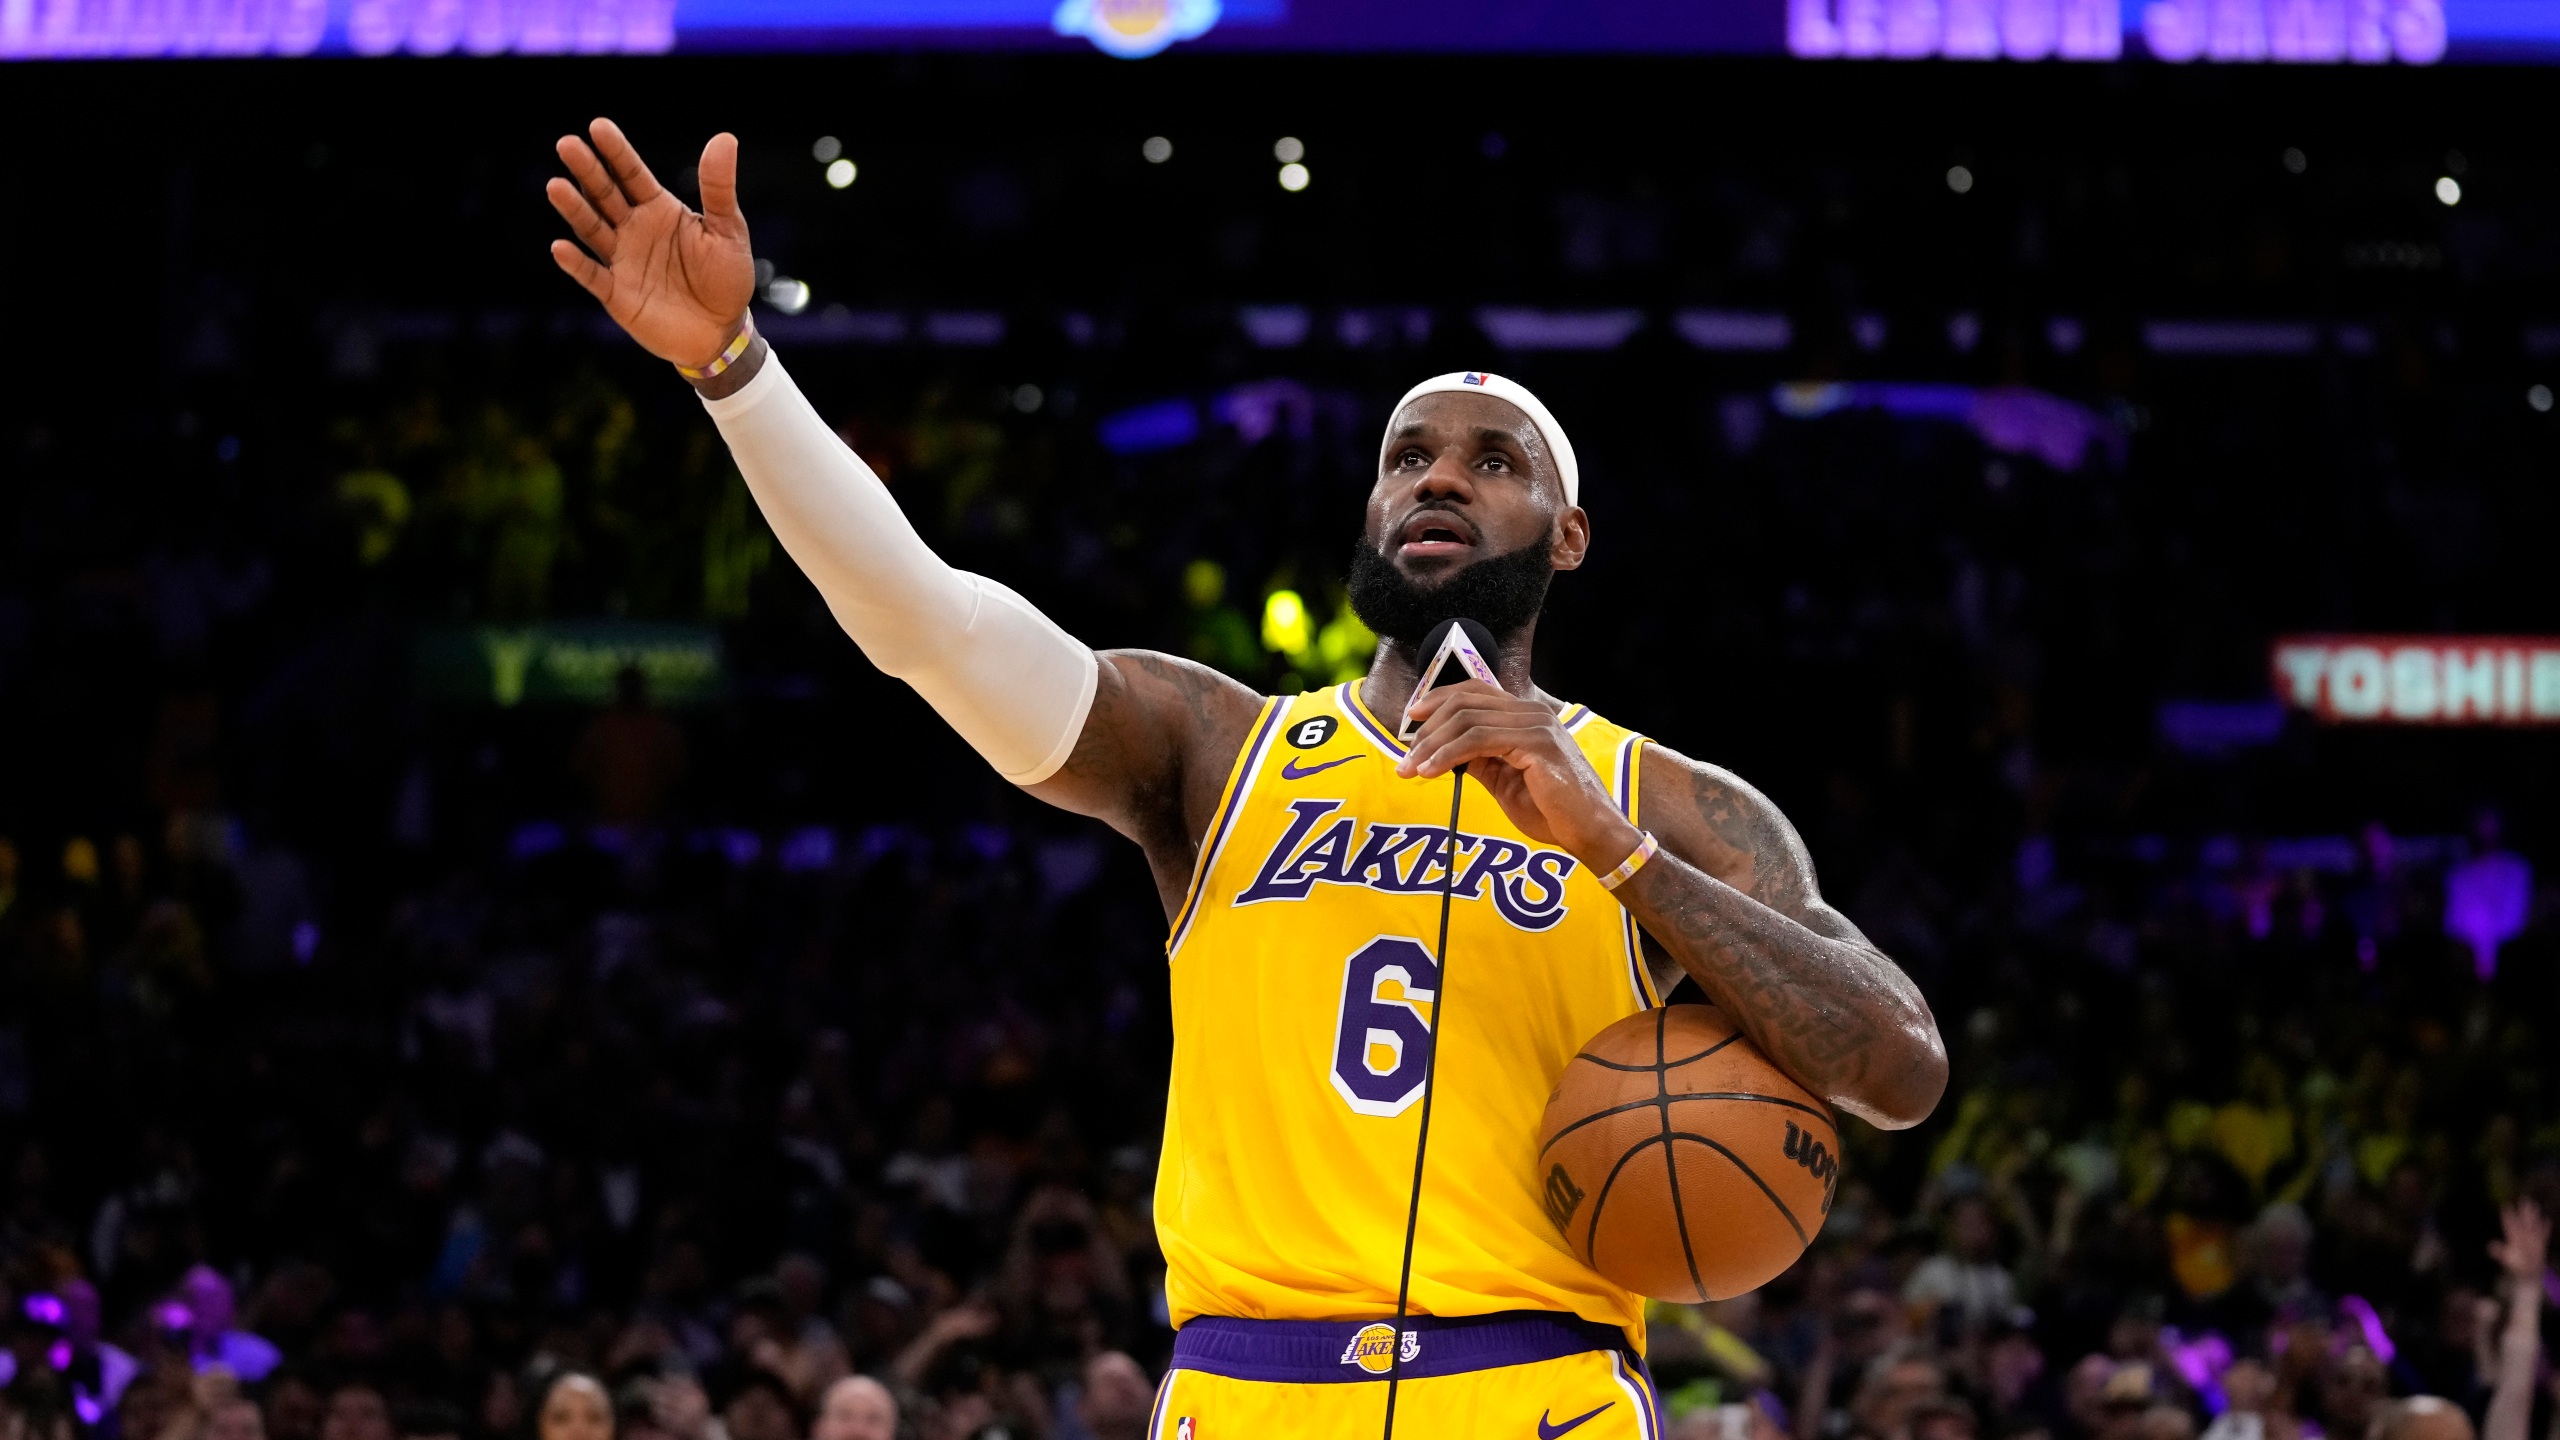 days later, LeBron still feels scoring record is 'surreal'